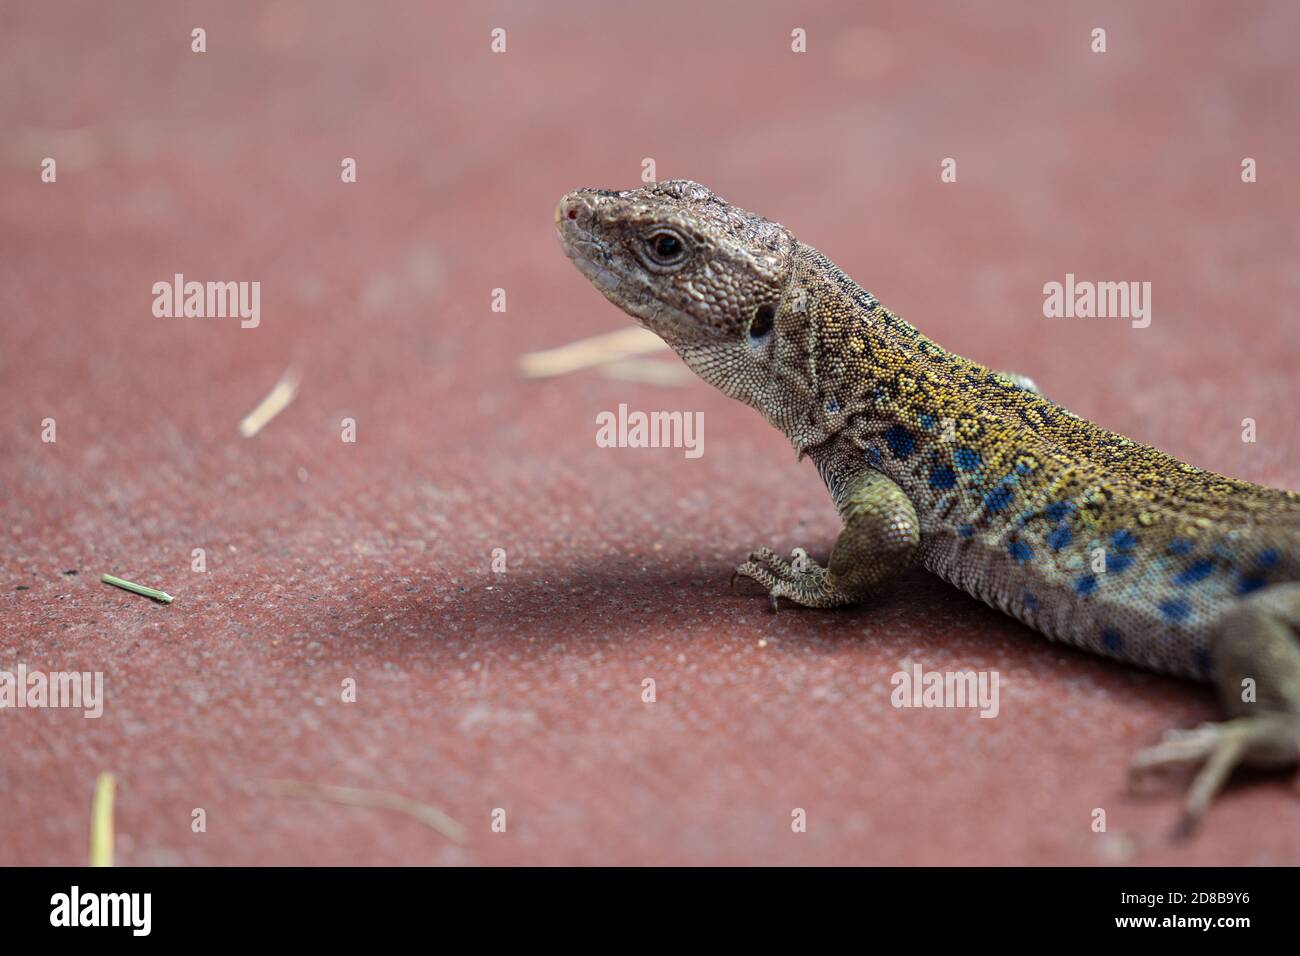 Beautiful multi colored lizard sitting on the floor waiting for prey Stock Photo